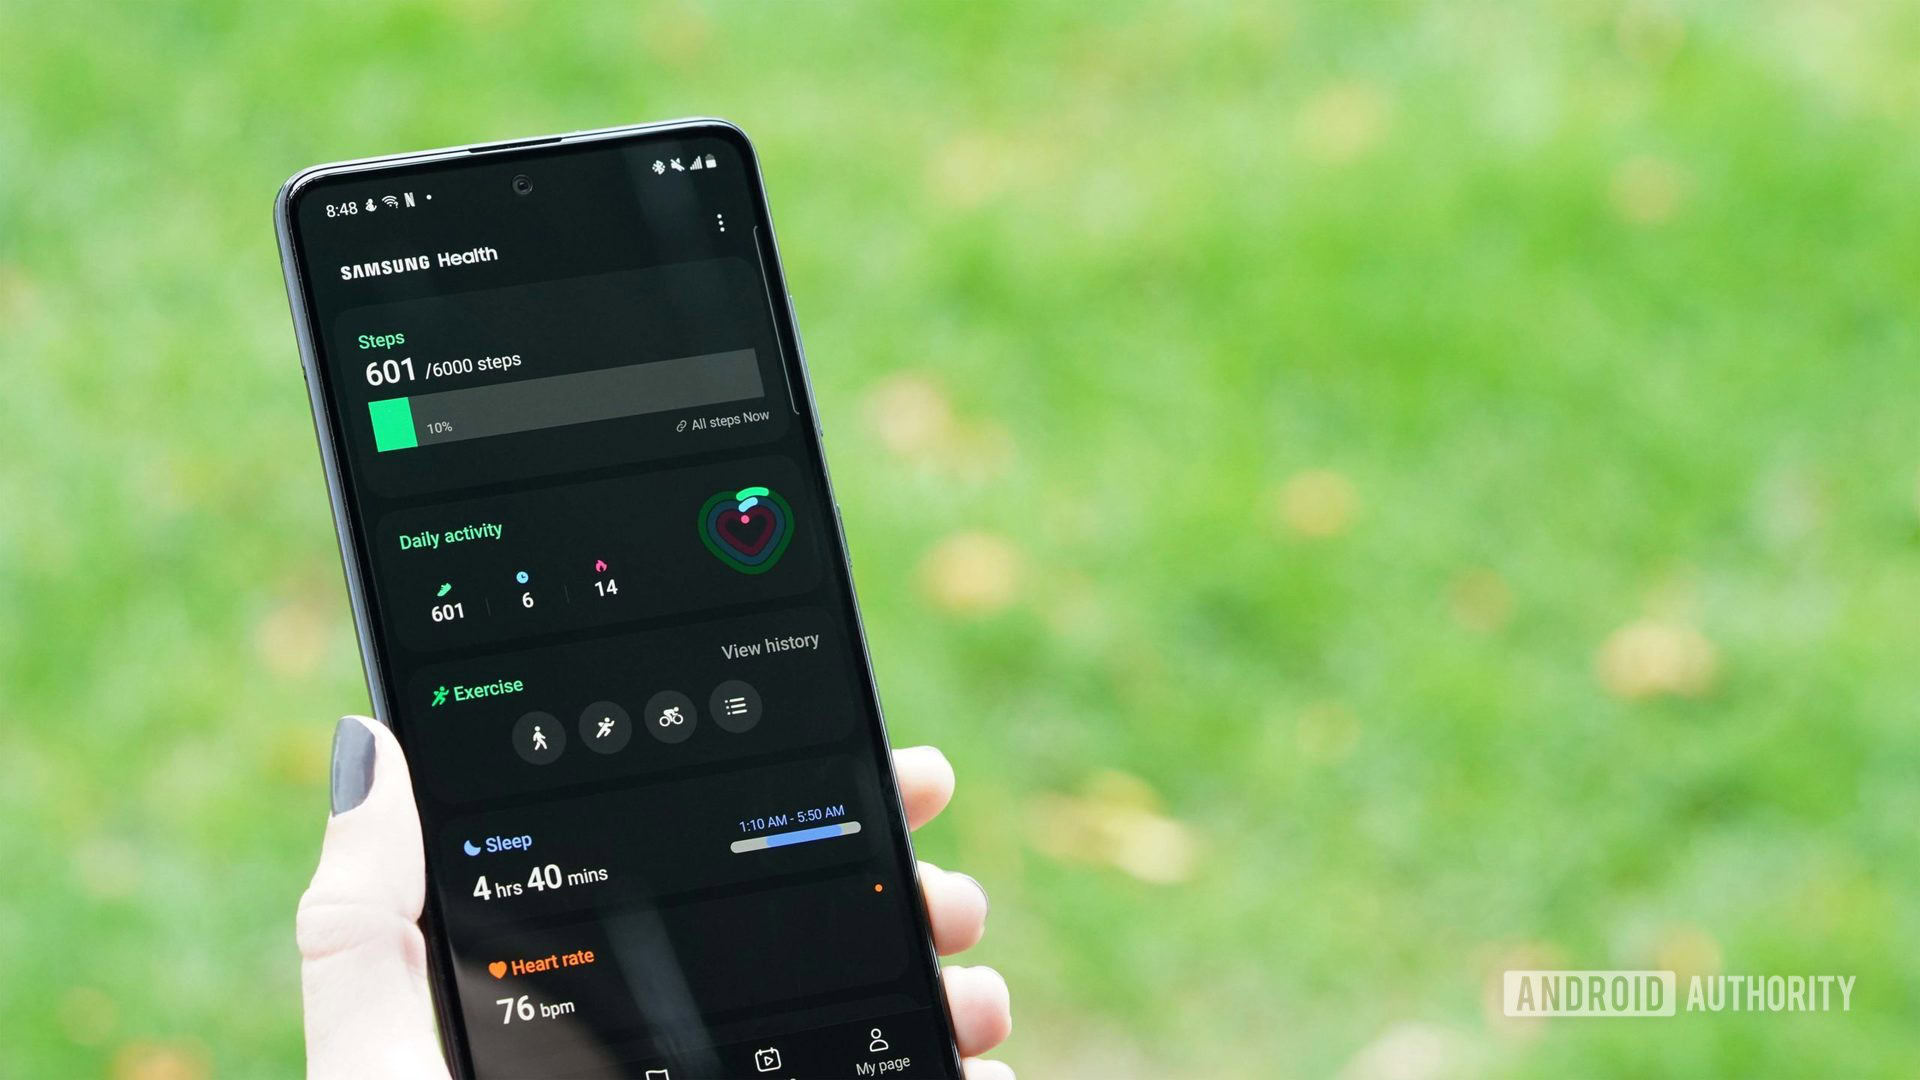 Here’s an early look at Samsung’s new Energy Score feature (APK teardown)